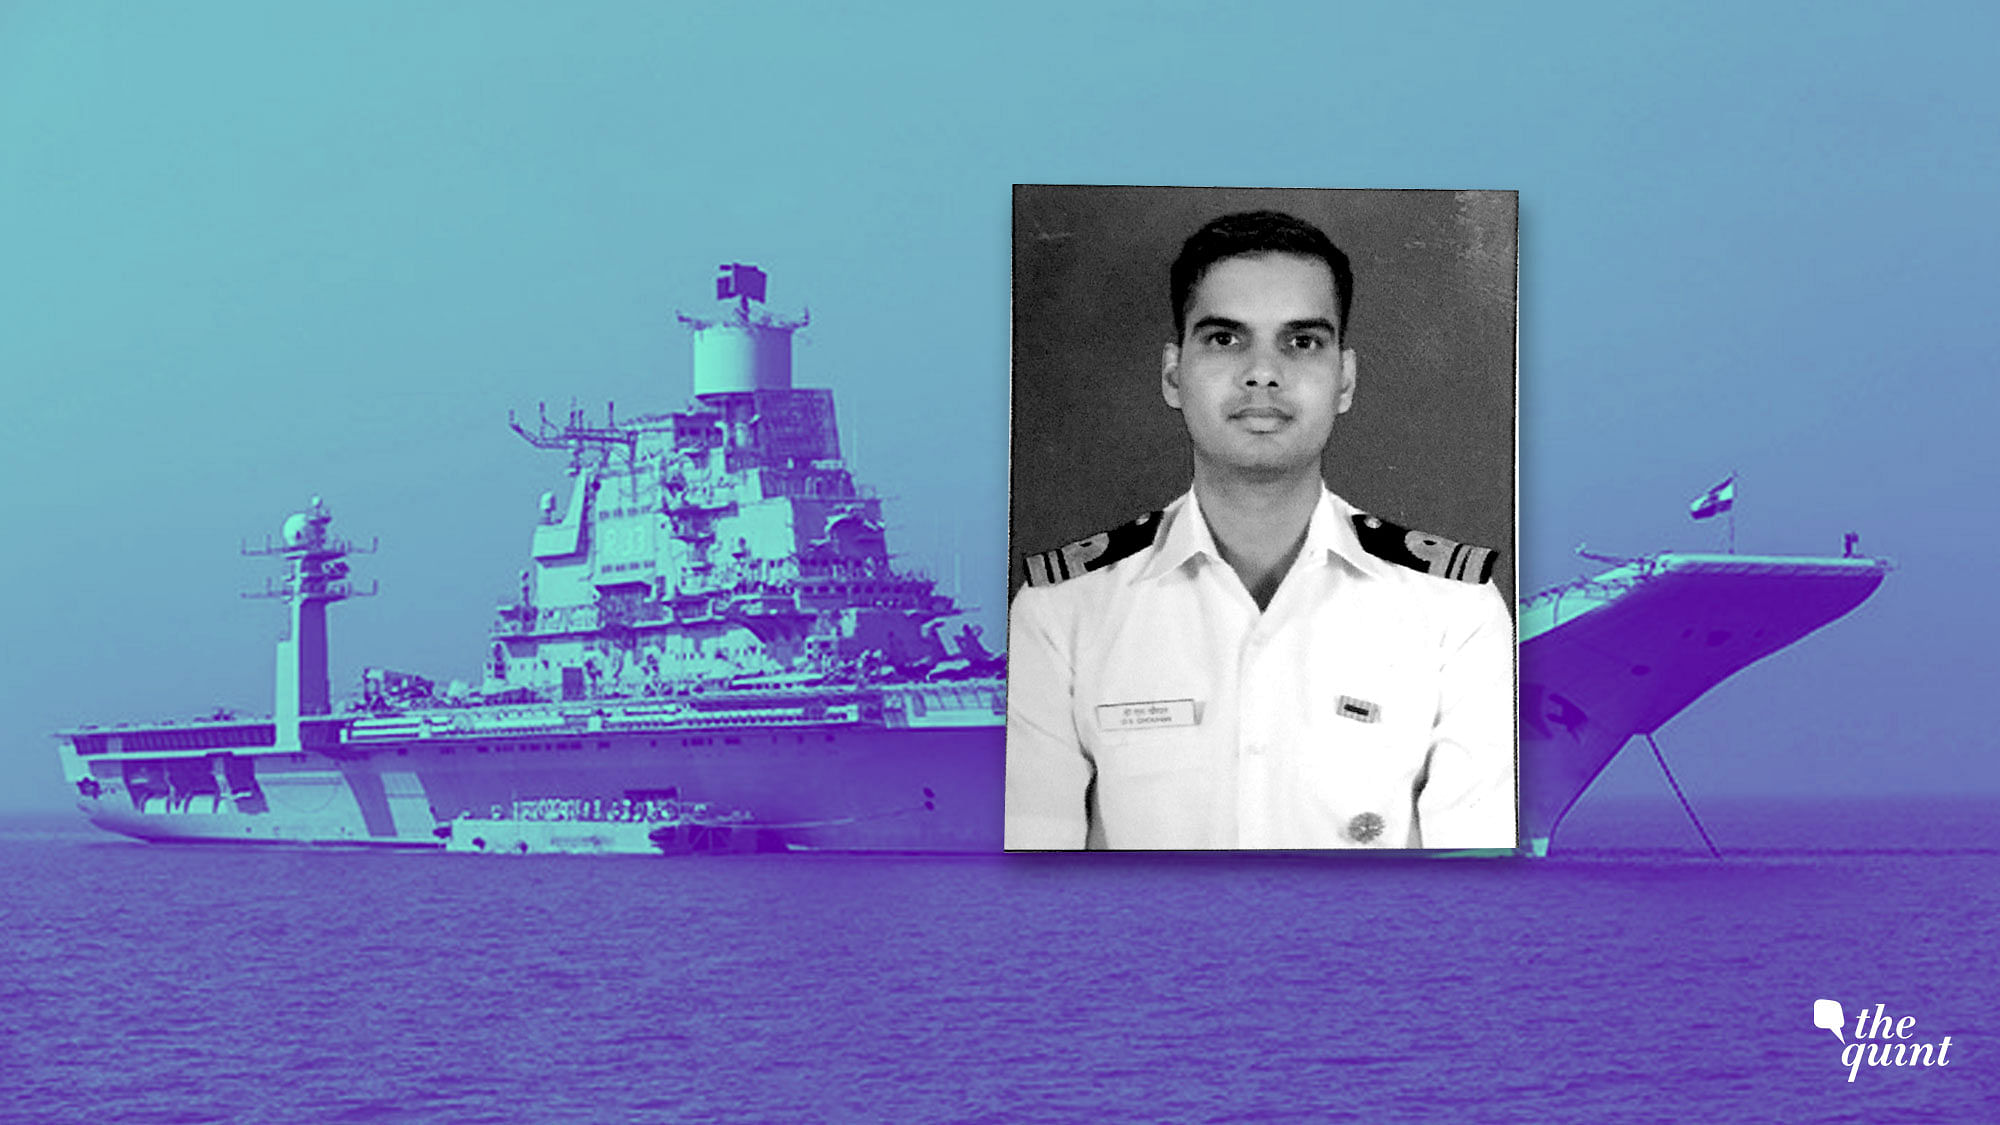 The Indian Navy has ordered a Board of Inquiry to probe the incident.